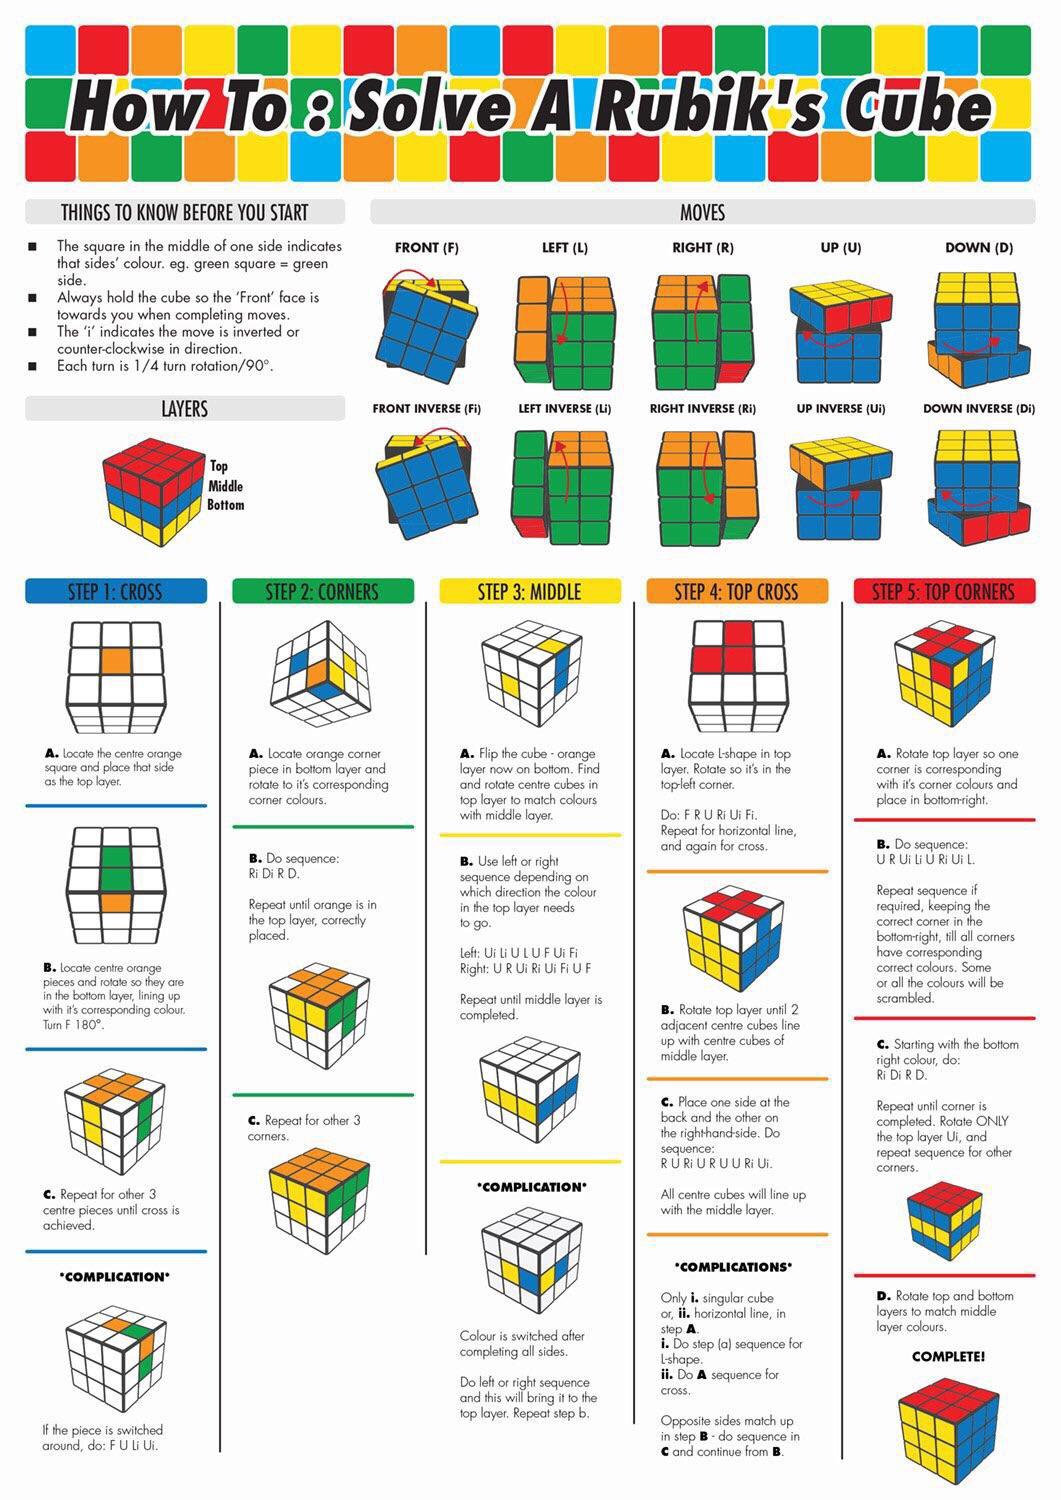 How To Solve A Rubix Cube